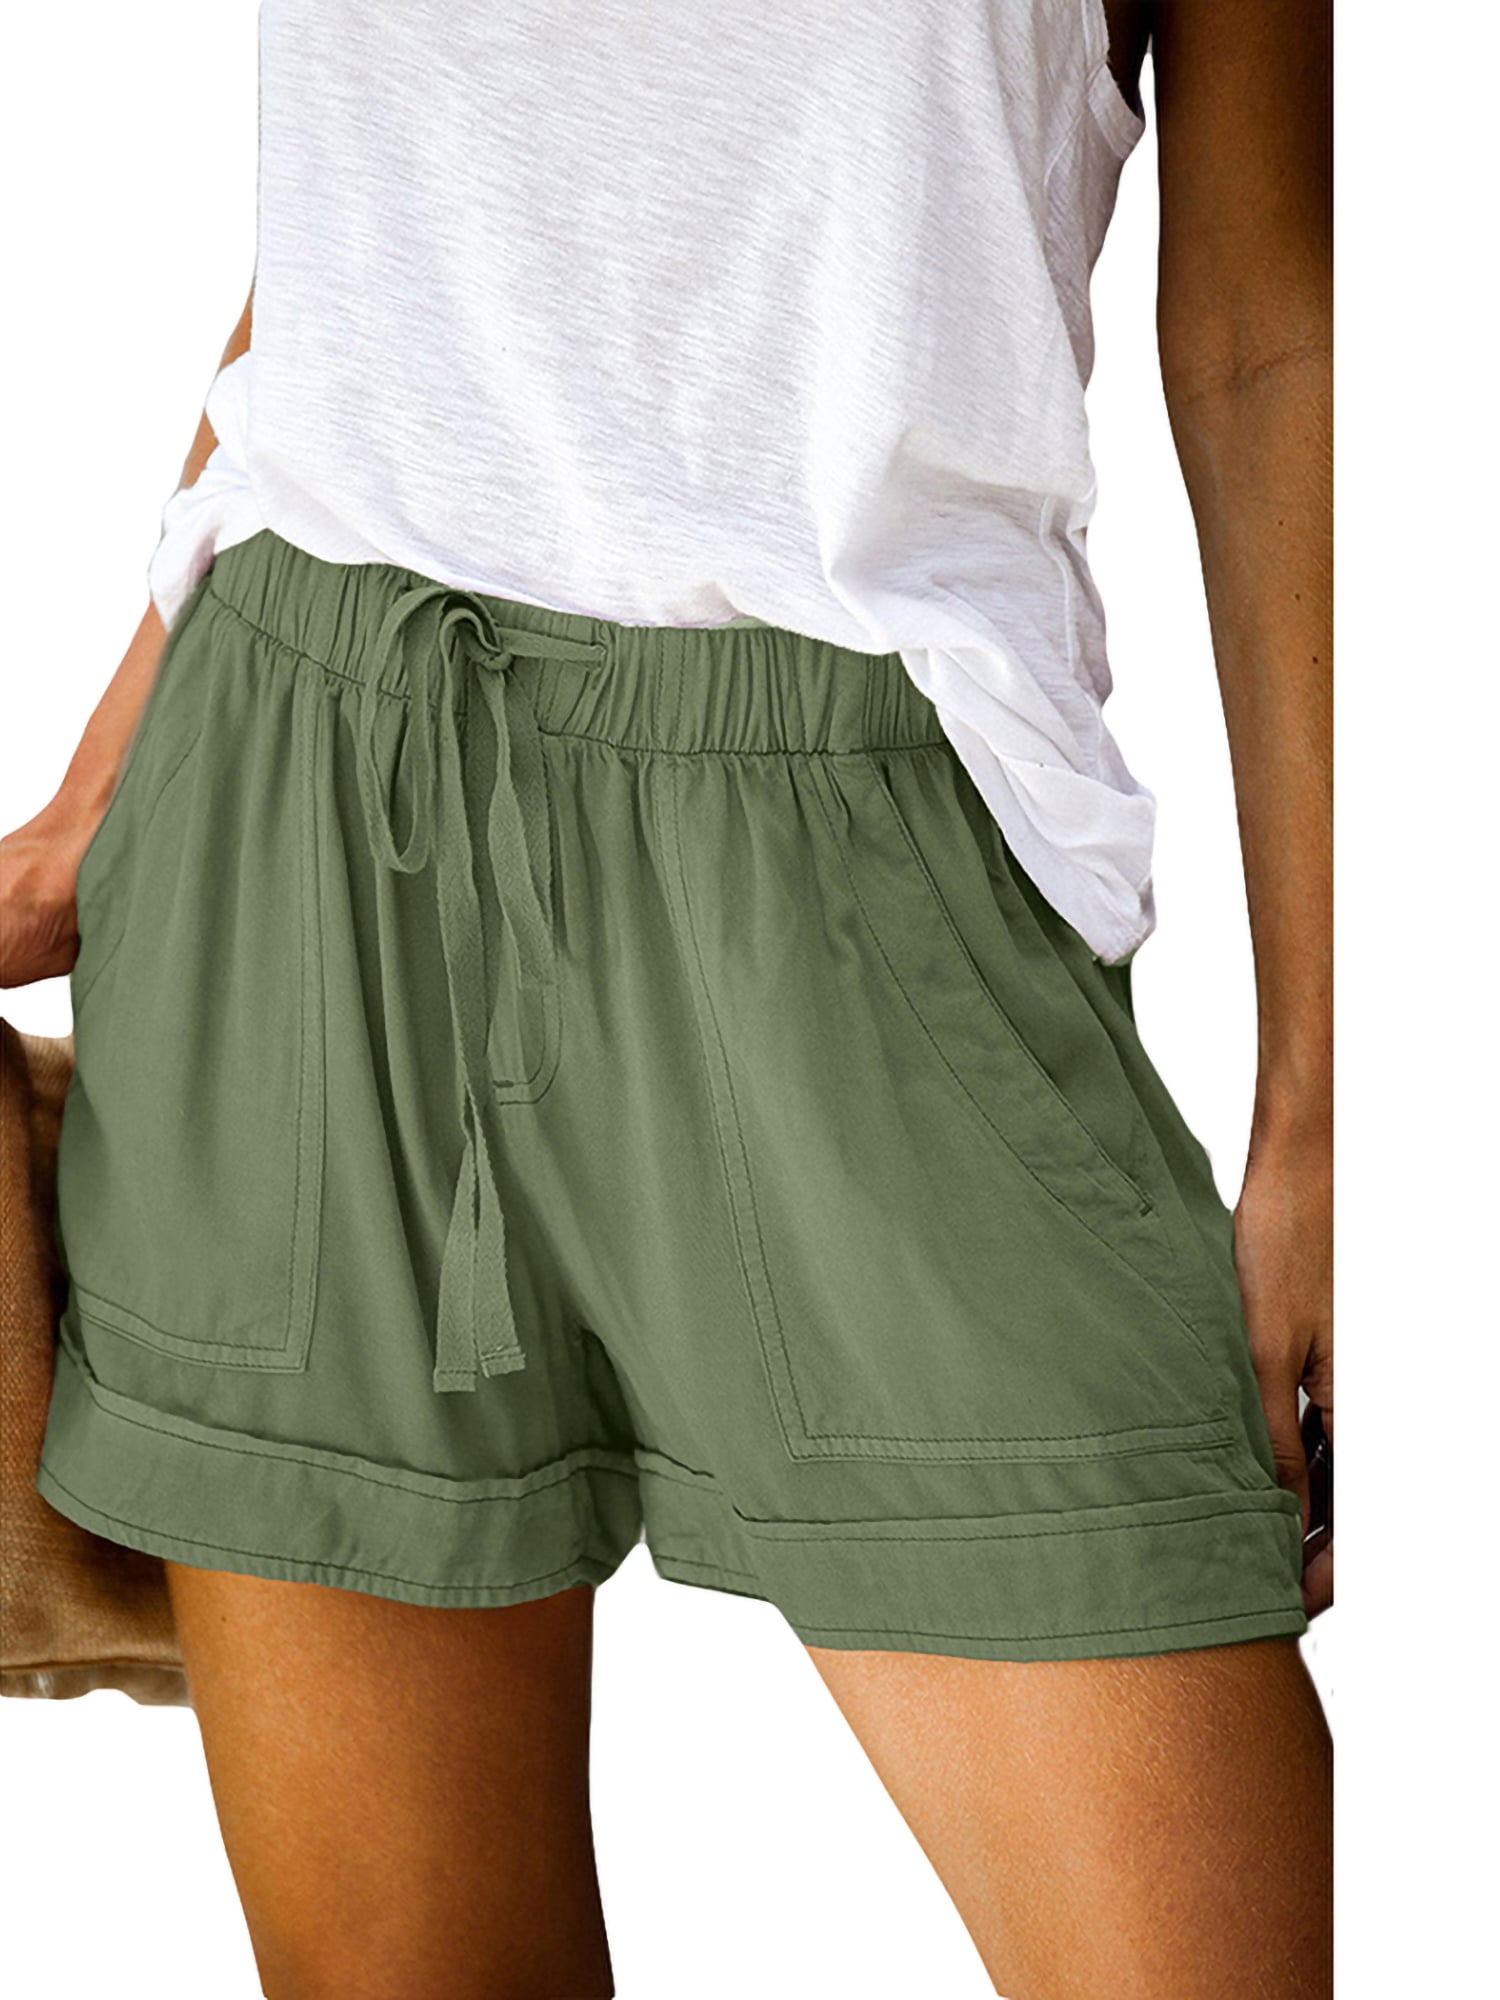 Womens Summer Shorts Mid Length Solid Shorts Plus Size Loose Fit Pants Casual Hiking Sport Shorts 